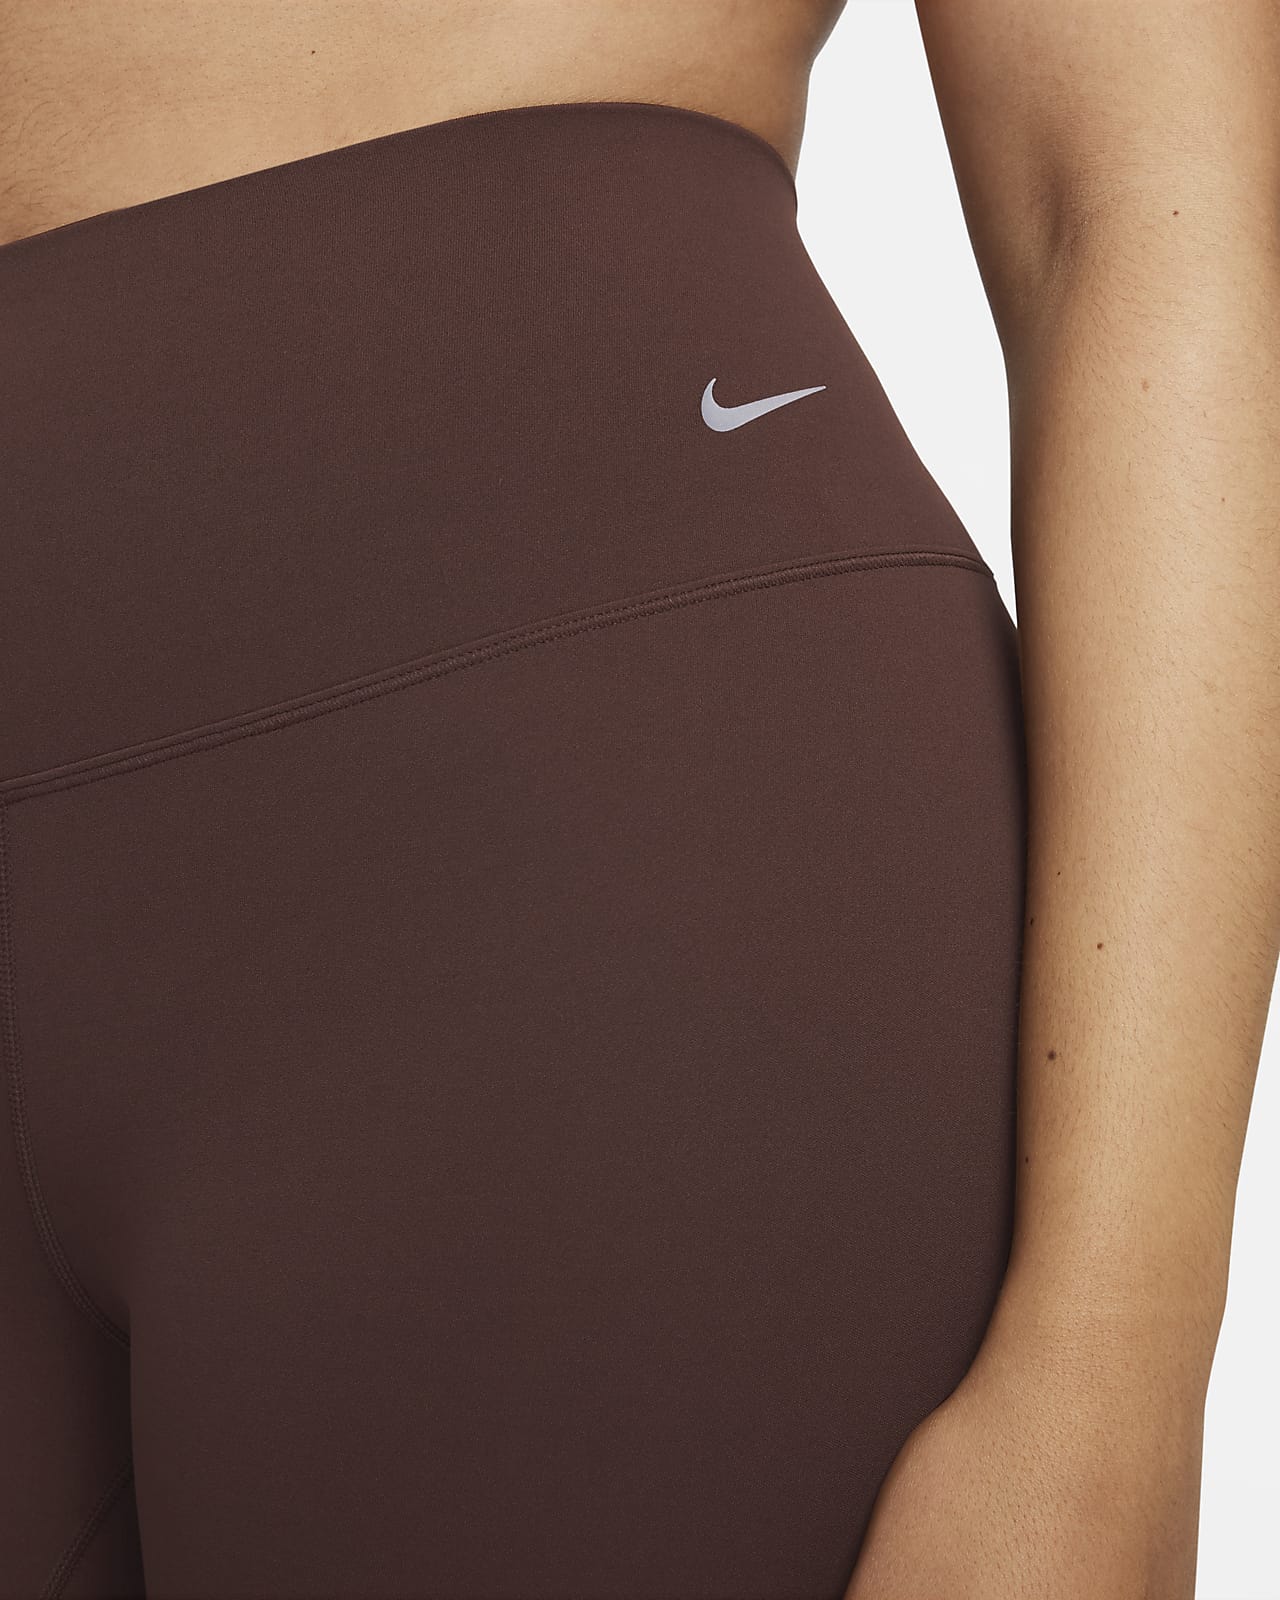 Best workout gear - sorted 👌 pair the Burgundy Mesh Luxe Leggings